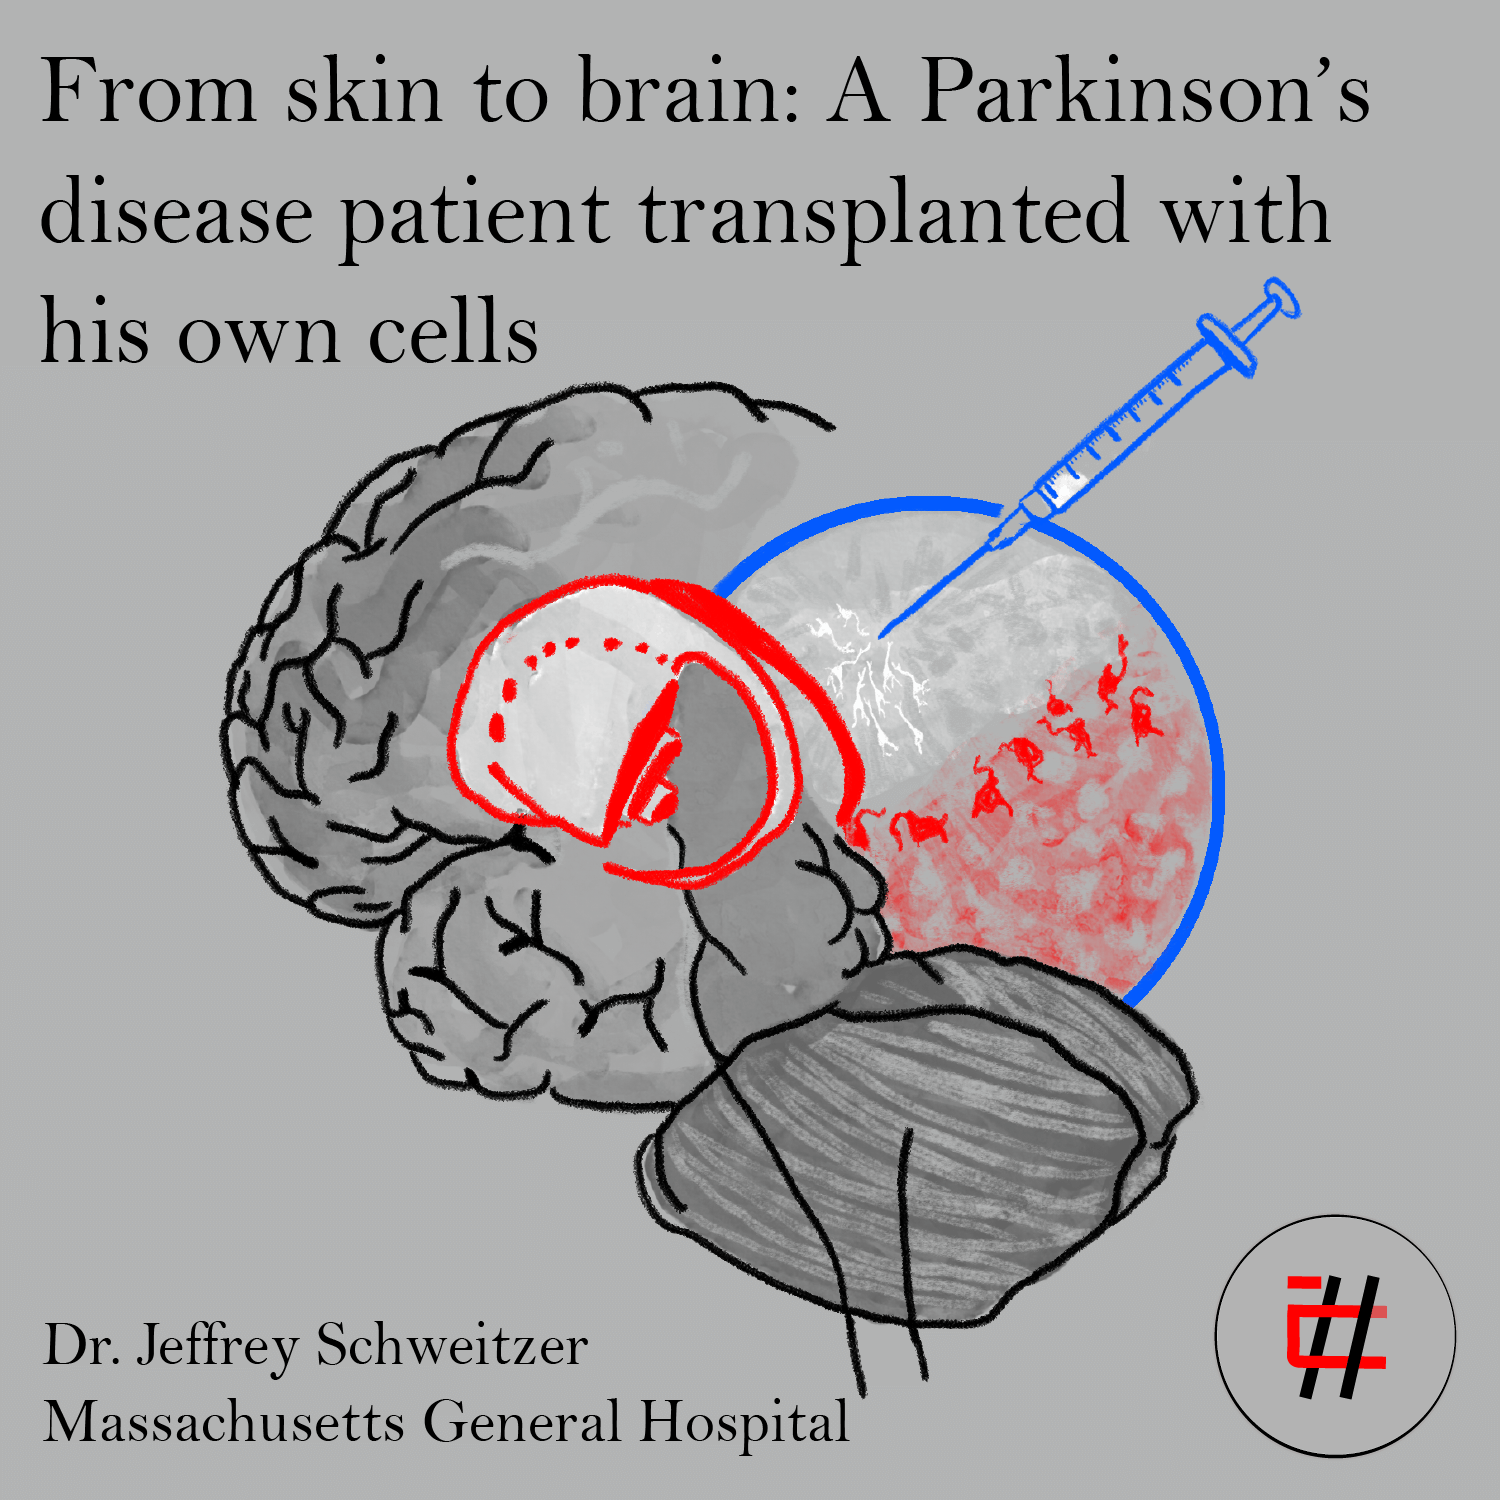 From Skin to Brain: A Parkinson’s Disease Patient Transplanted with His Own Cells